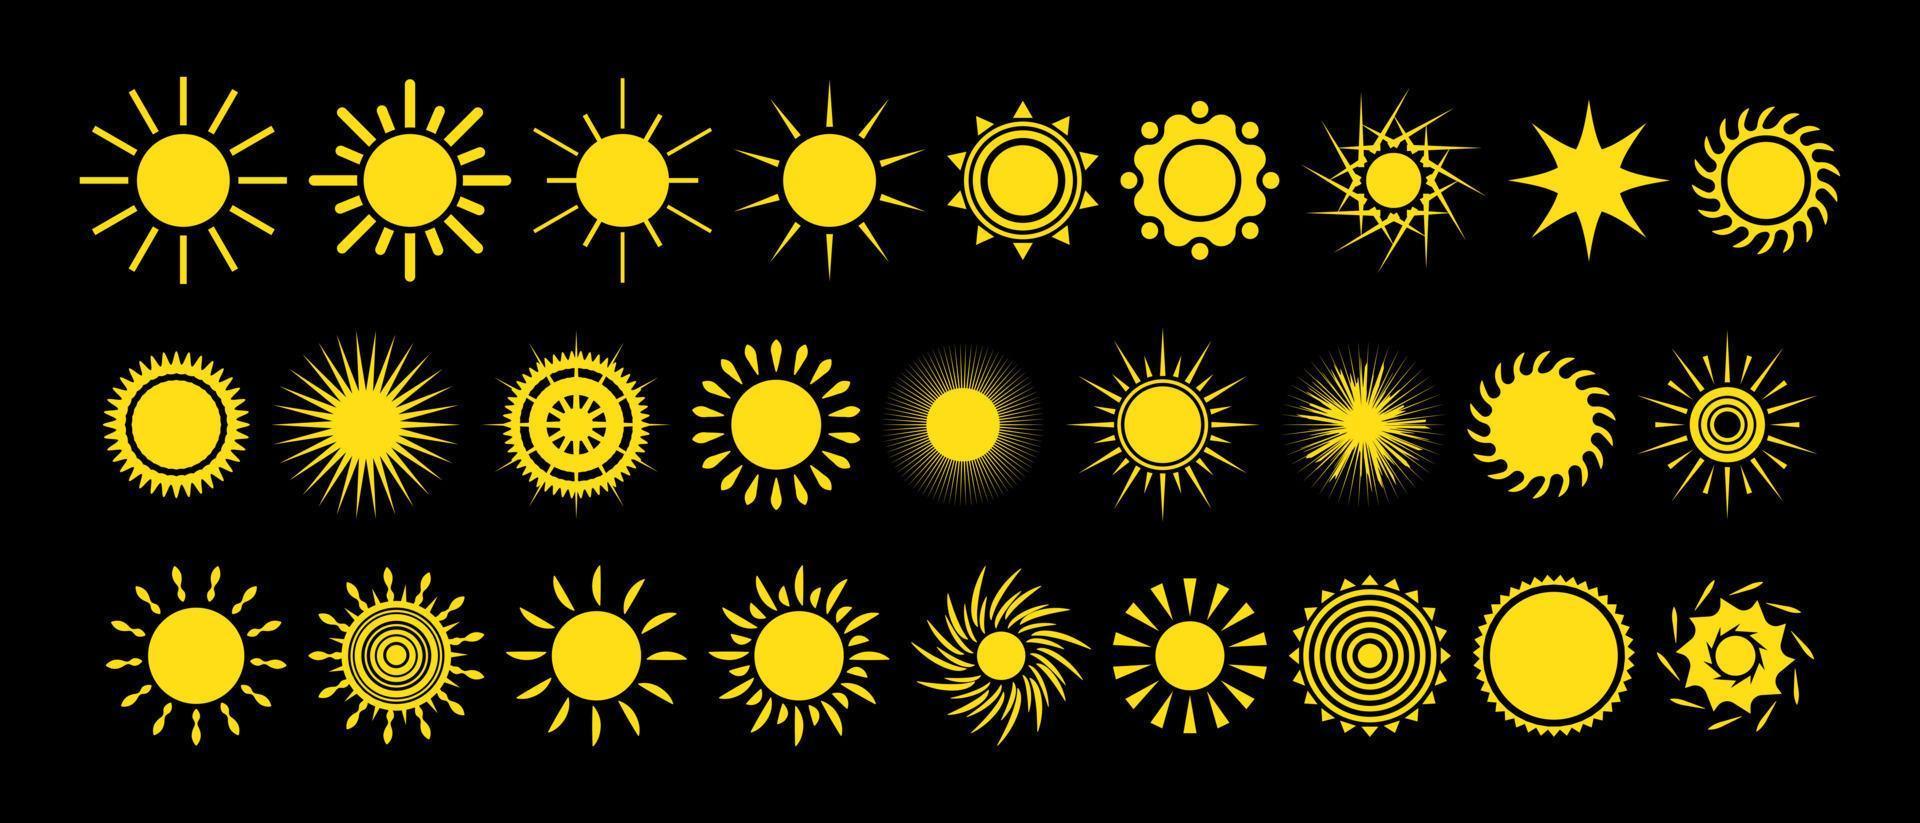 Set of yellow sun icons with various shapes. Summer, design elements, sunshine, daylight. Vector illustration